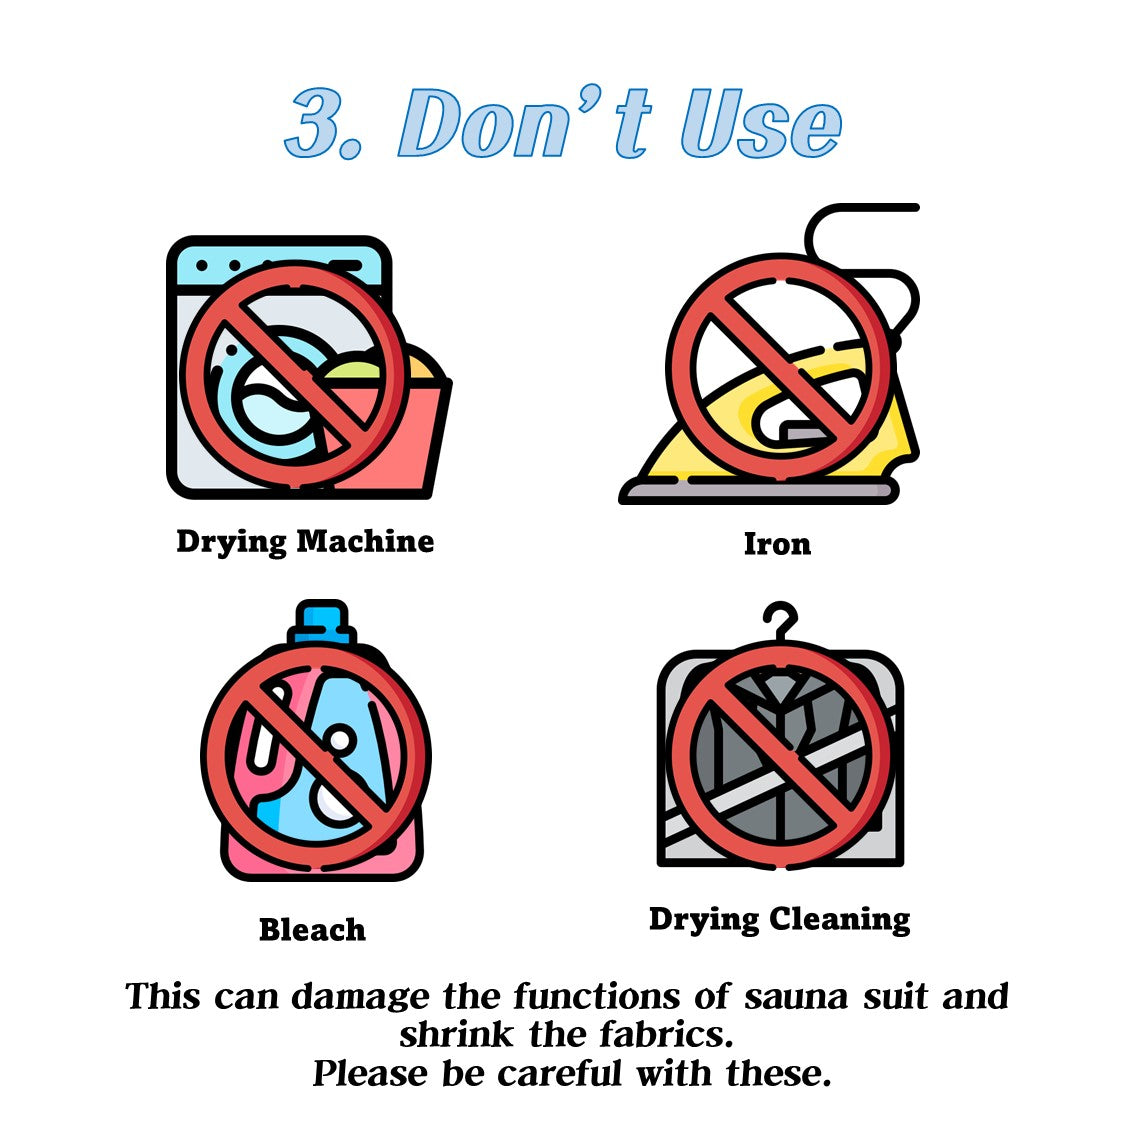 Do not use bleach and iron